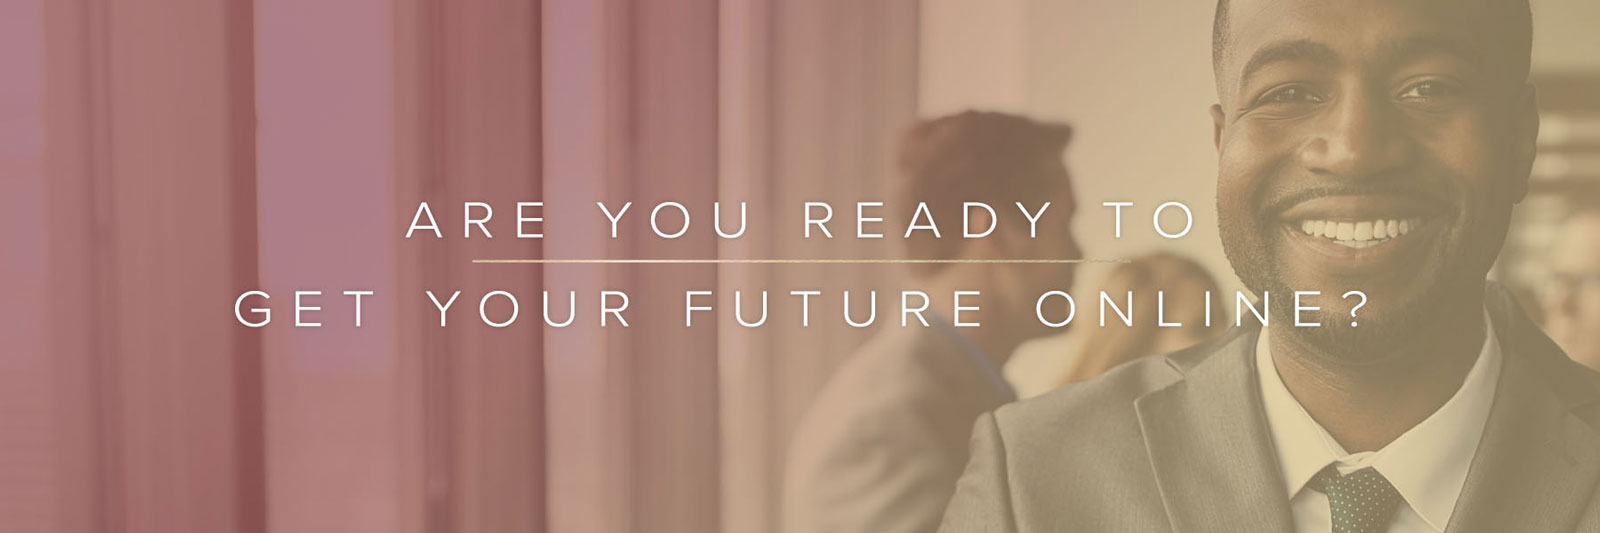 are you ready to get your future online?